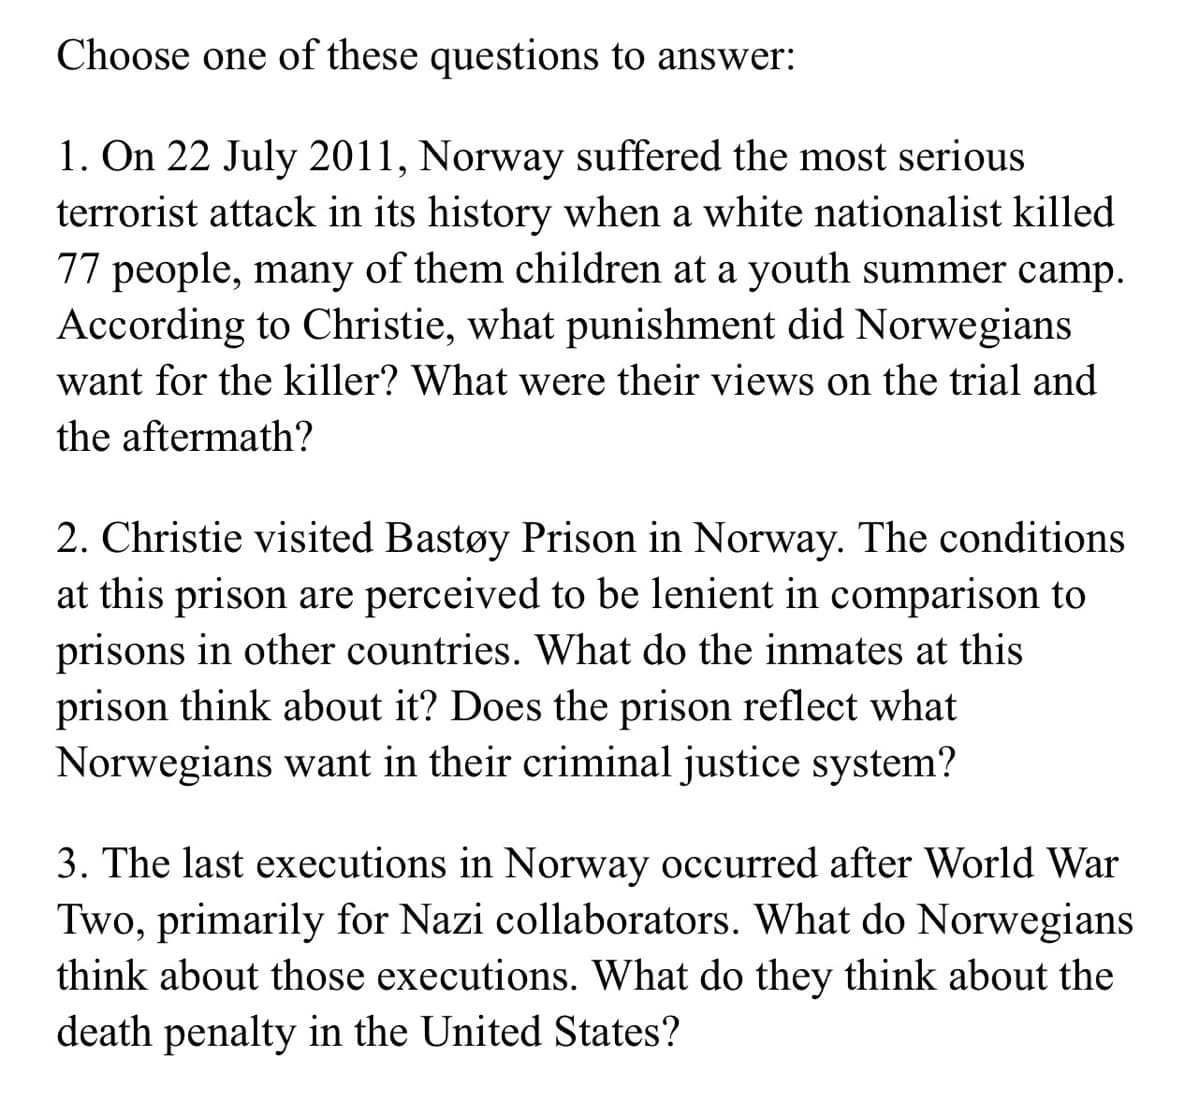 Choose one of these questions to answer:
1. On 22 July 2011, Norway suffered the most serious
terrorist attack in its history when a white nationalist killed
77 people, many of them children at a youth summer camp.
According to Christie, what punishment did Norwegians
want for the killer? What were their views on the trial and
the aftermath?
2. Christie visited Bastøy Prison in Norway. The conditions
at this prison are perceived to be lenient in comparison to
prisons in other countries. What do the inmates at this
prison think about it? Does the prison reflect what
Norwegians want in their criminal justice system?
3. The last executions in Norway occurred after World War
Two, primarily for Nazi collaborators. What do Norwegians
think about those executions. What do they think about the
death penalty in the United States?